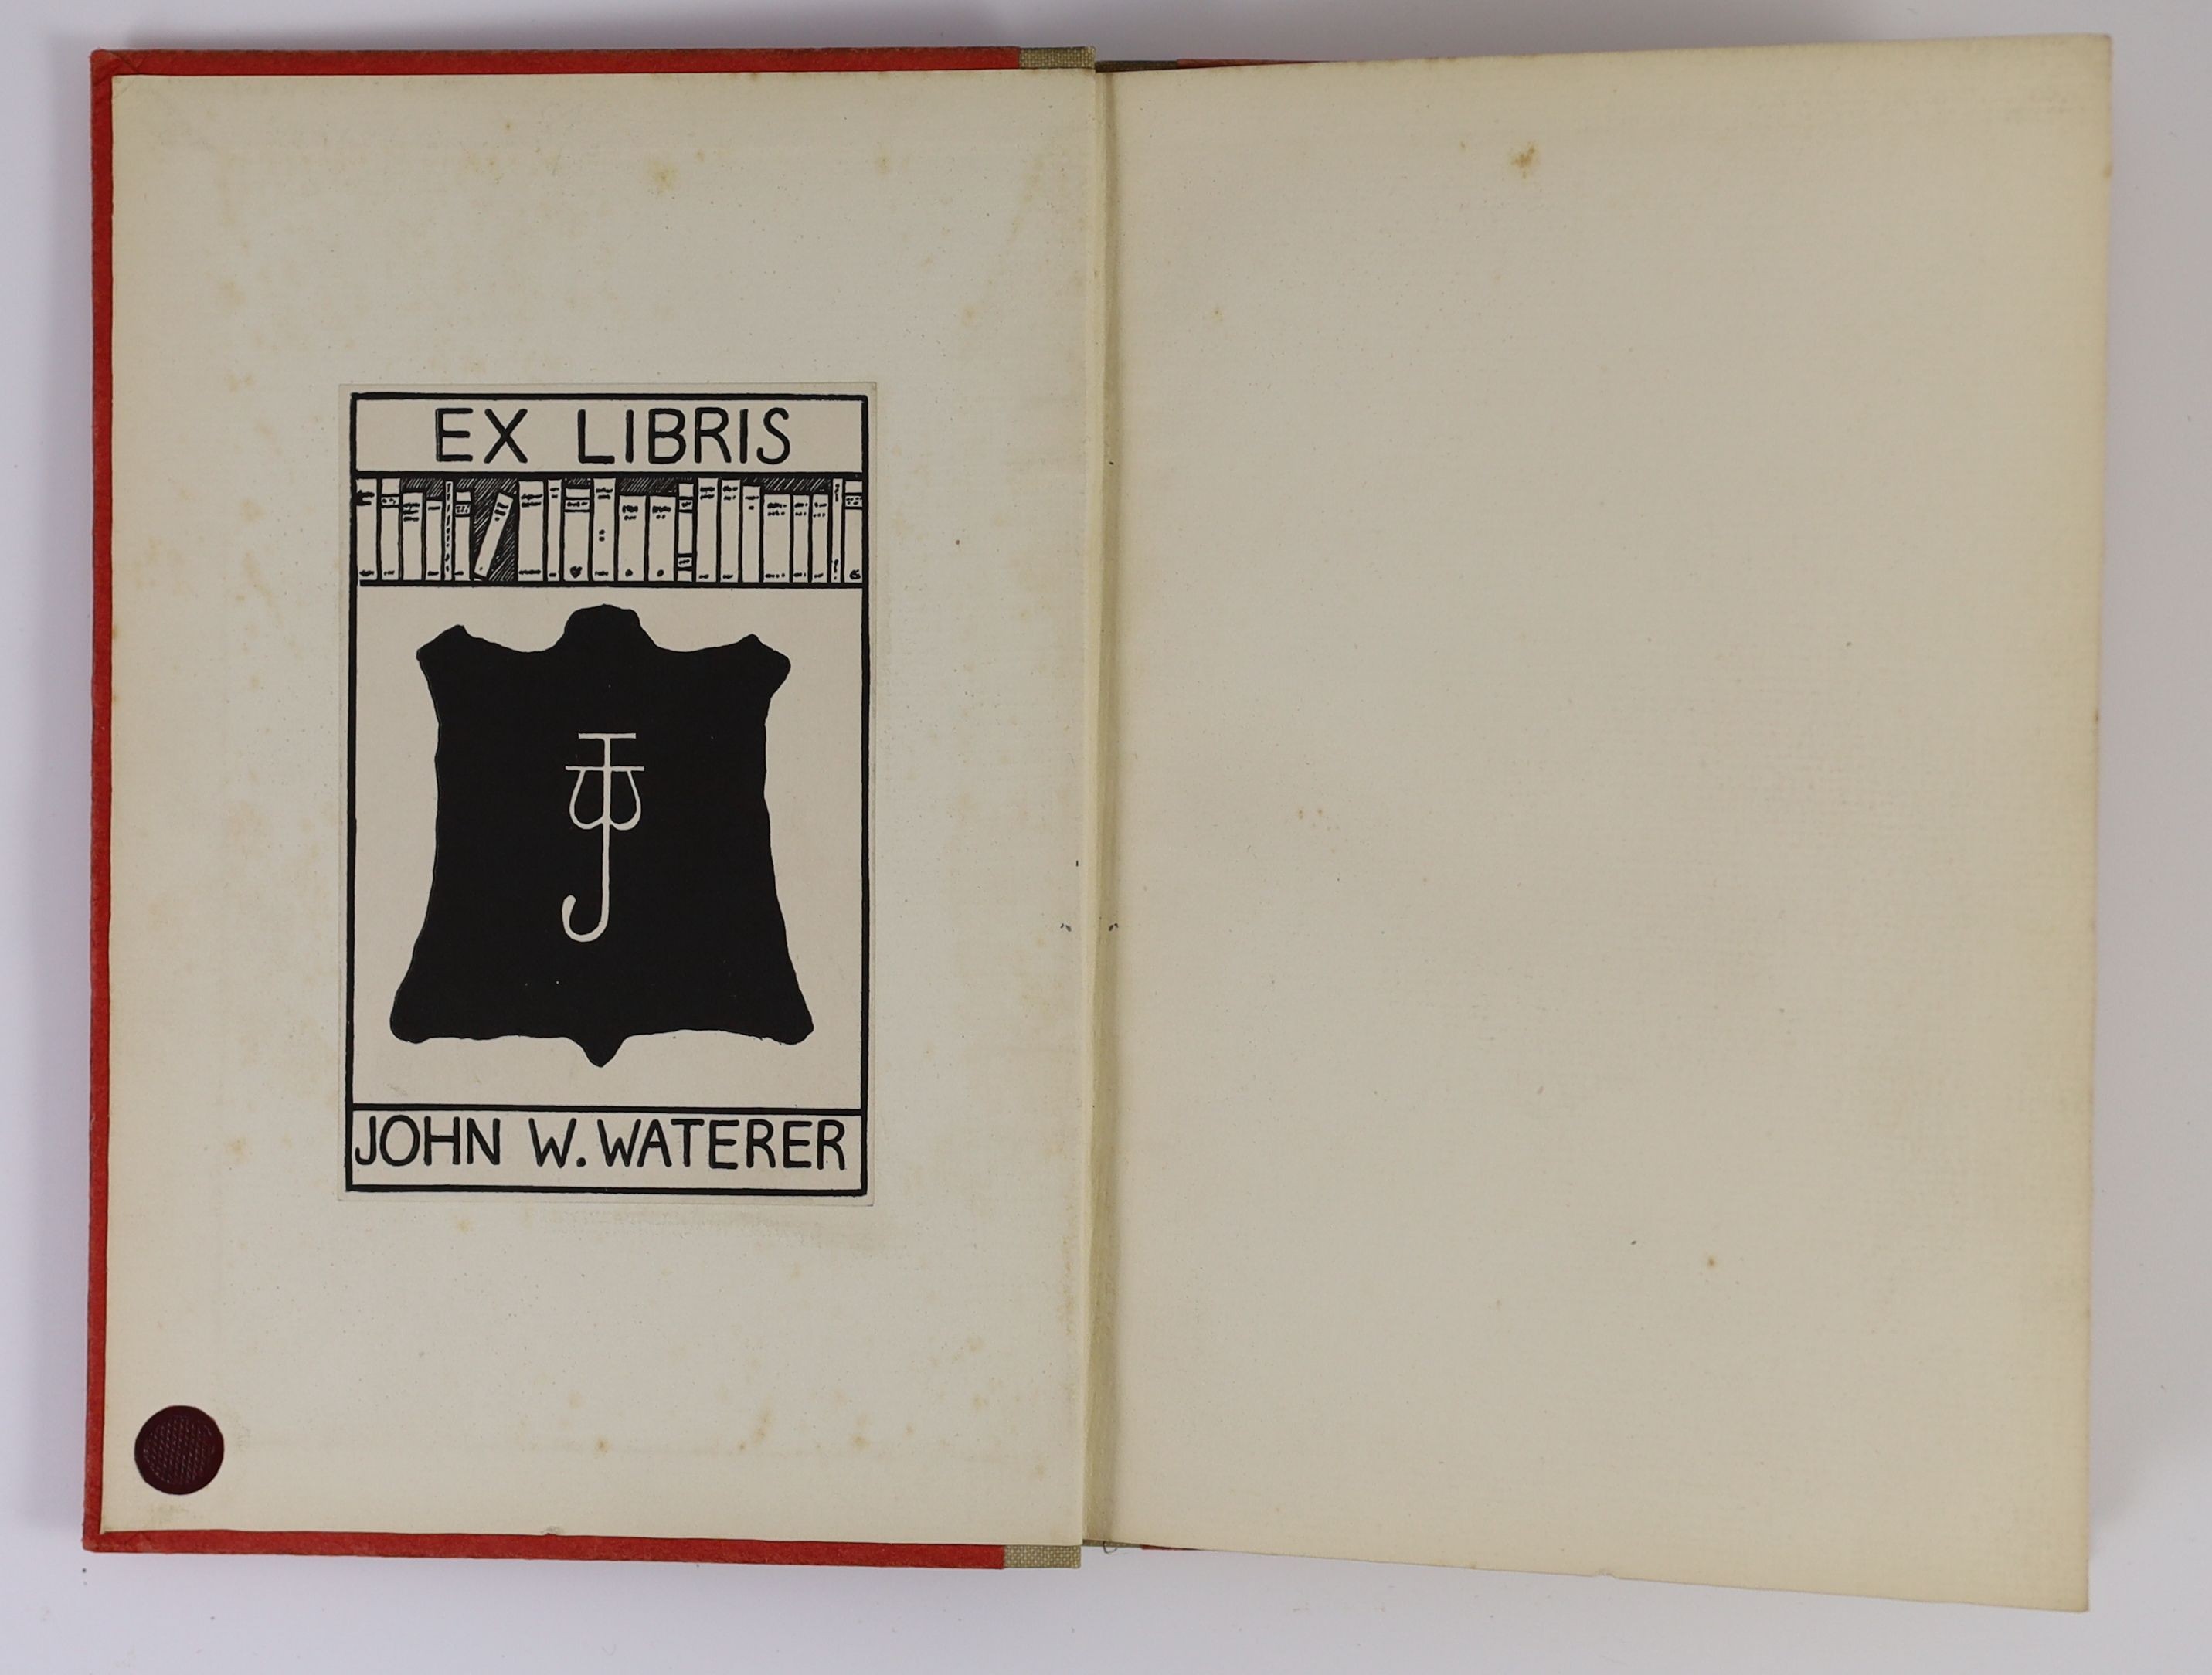 Pepler, Hilary Douglas Clark - The Devil’s Devices, or Control versus Service, illustrated with 11 wood-engravings by Eric Gill, 8vo, cloth backed printed paper boards, The Hampshire House Workshops, London, 1915